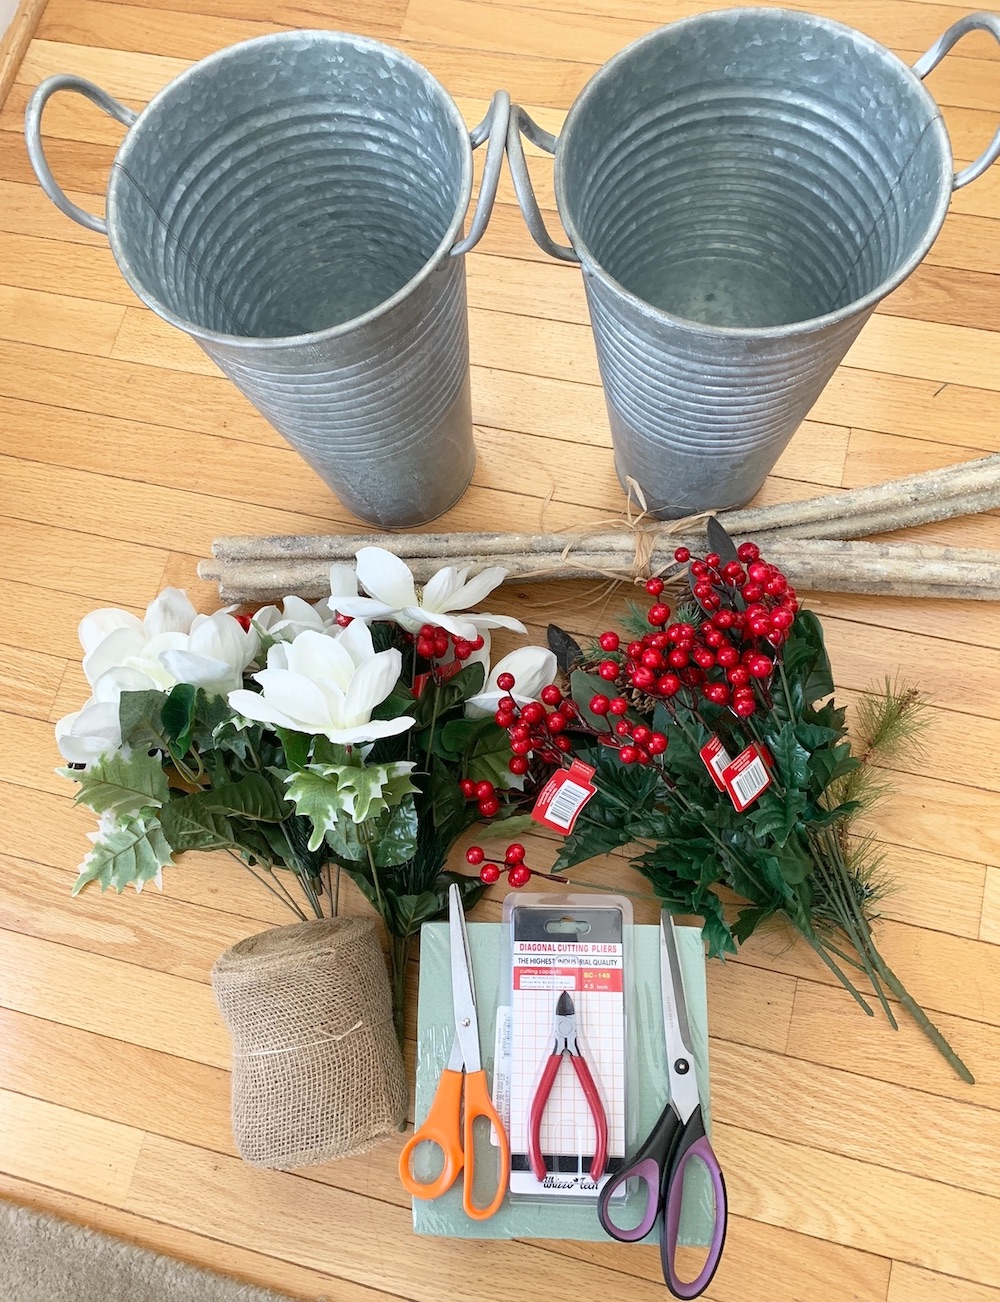 How to Decorate French Floral Buckets for Christmas Galvanize Bucket Supplies #DIY #DIYChristmasDecor #ChristmasDecor #ChristmasEntrywayDecor #DIYFrenchFloralBucketDecor #FrenchFloralBucketDecor #GalvanizedFloralBucketDecor #DecorTutorial